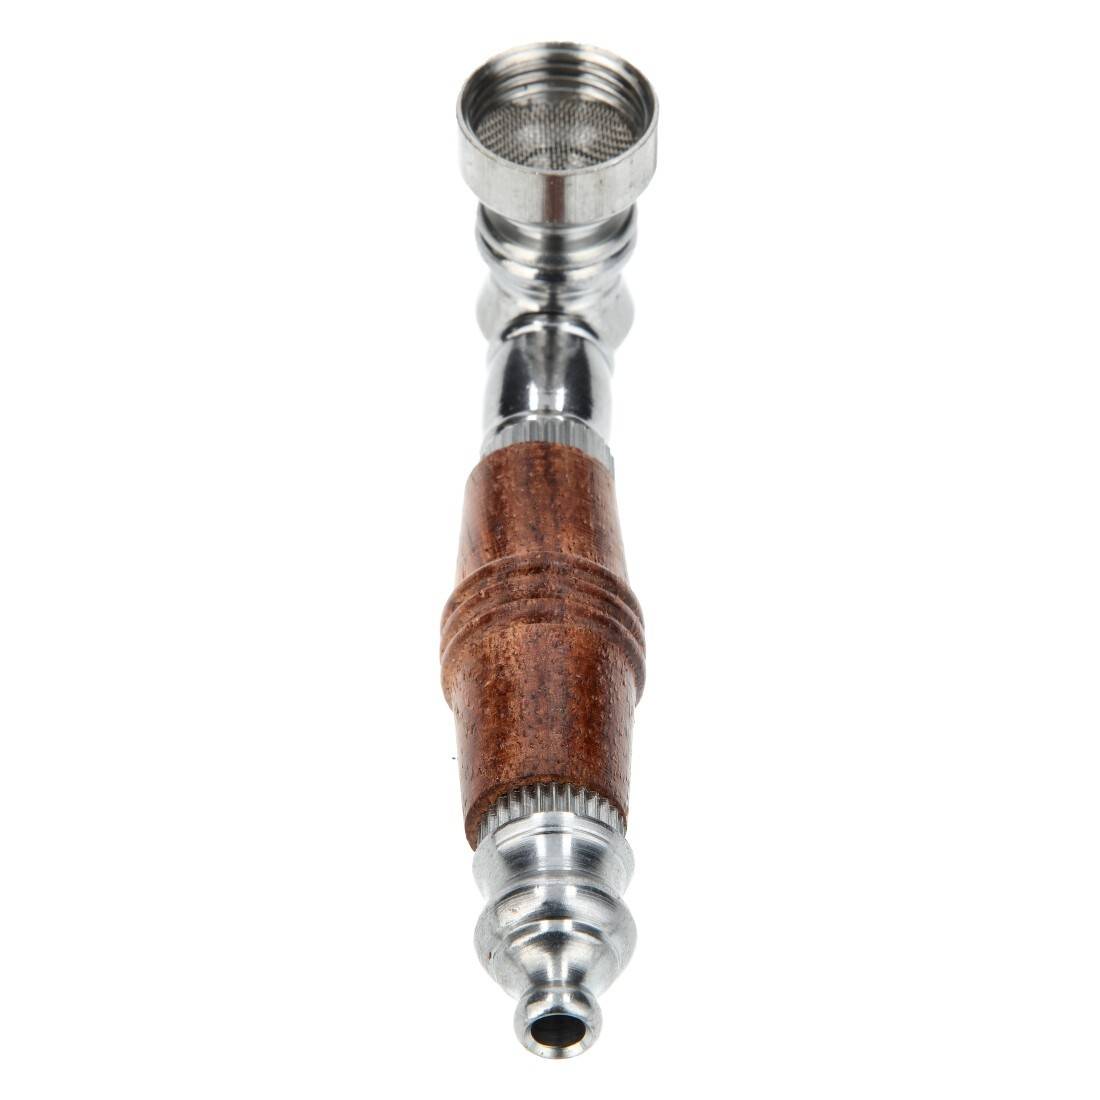 PIPE METAL AND WOOD 9 CM - Disponible sur SFactory !